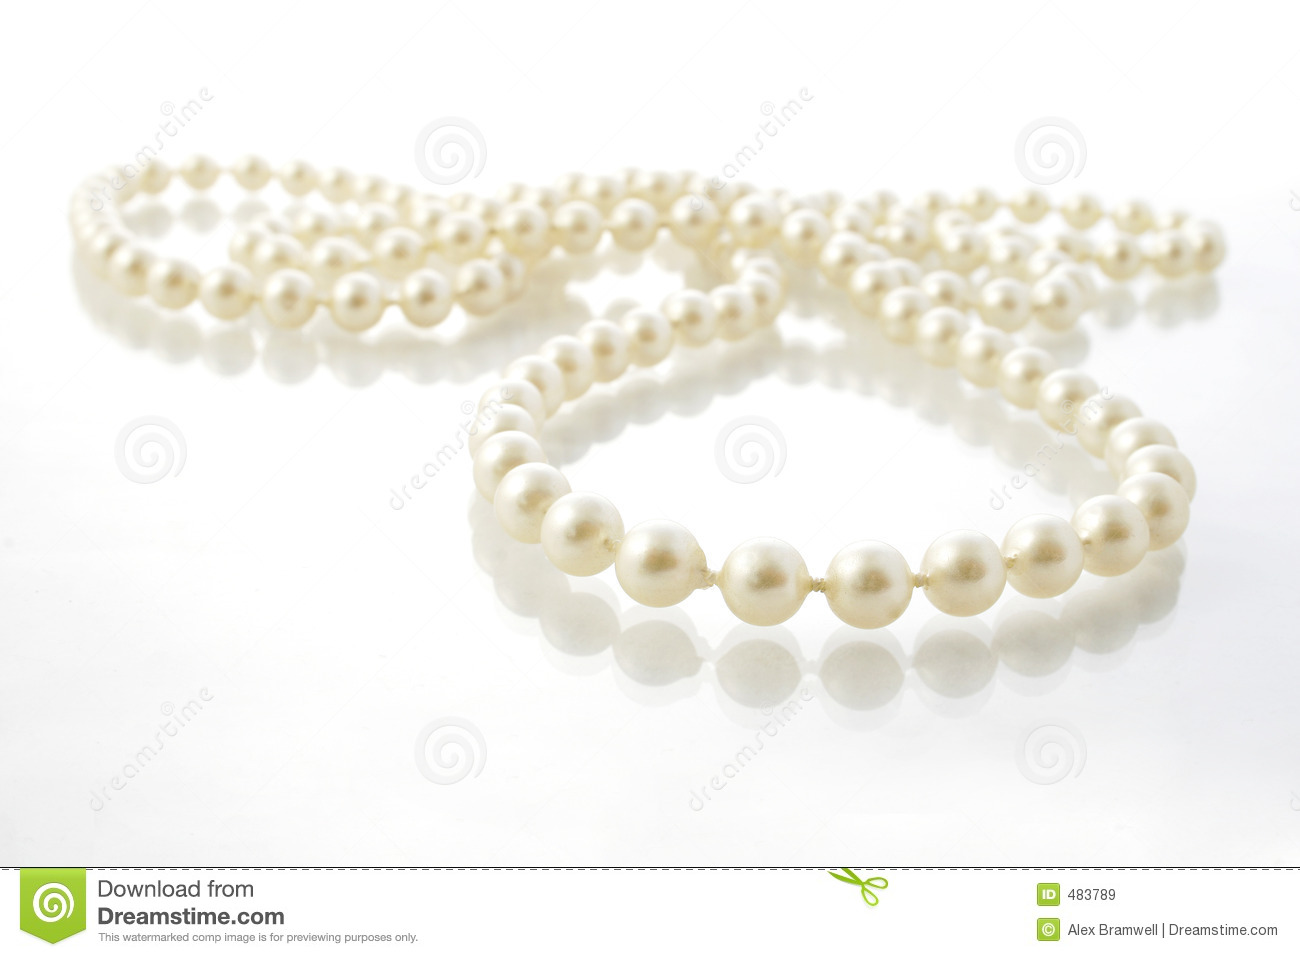 String Of Pearls Royalty Free Stock Images   Image  483789